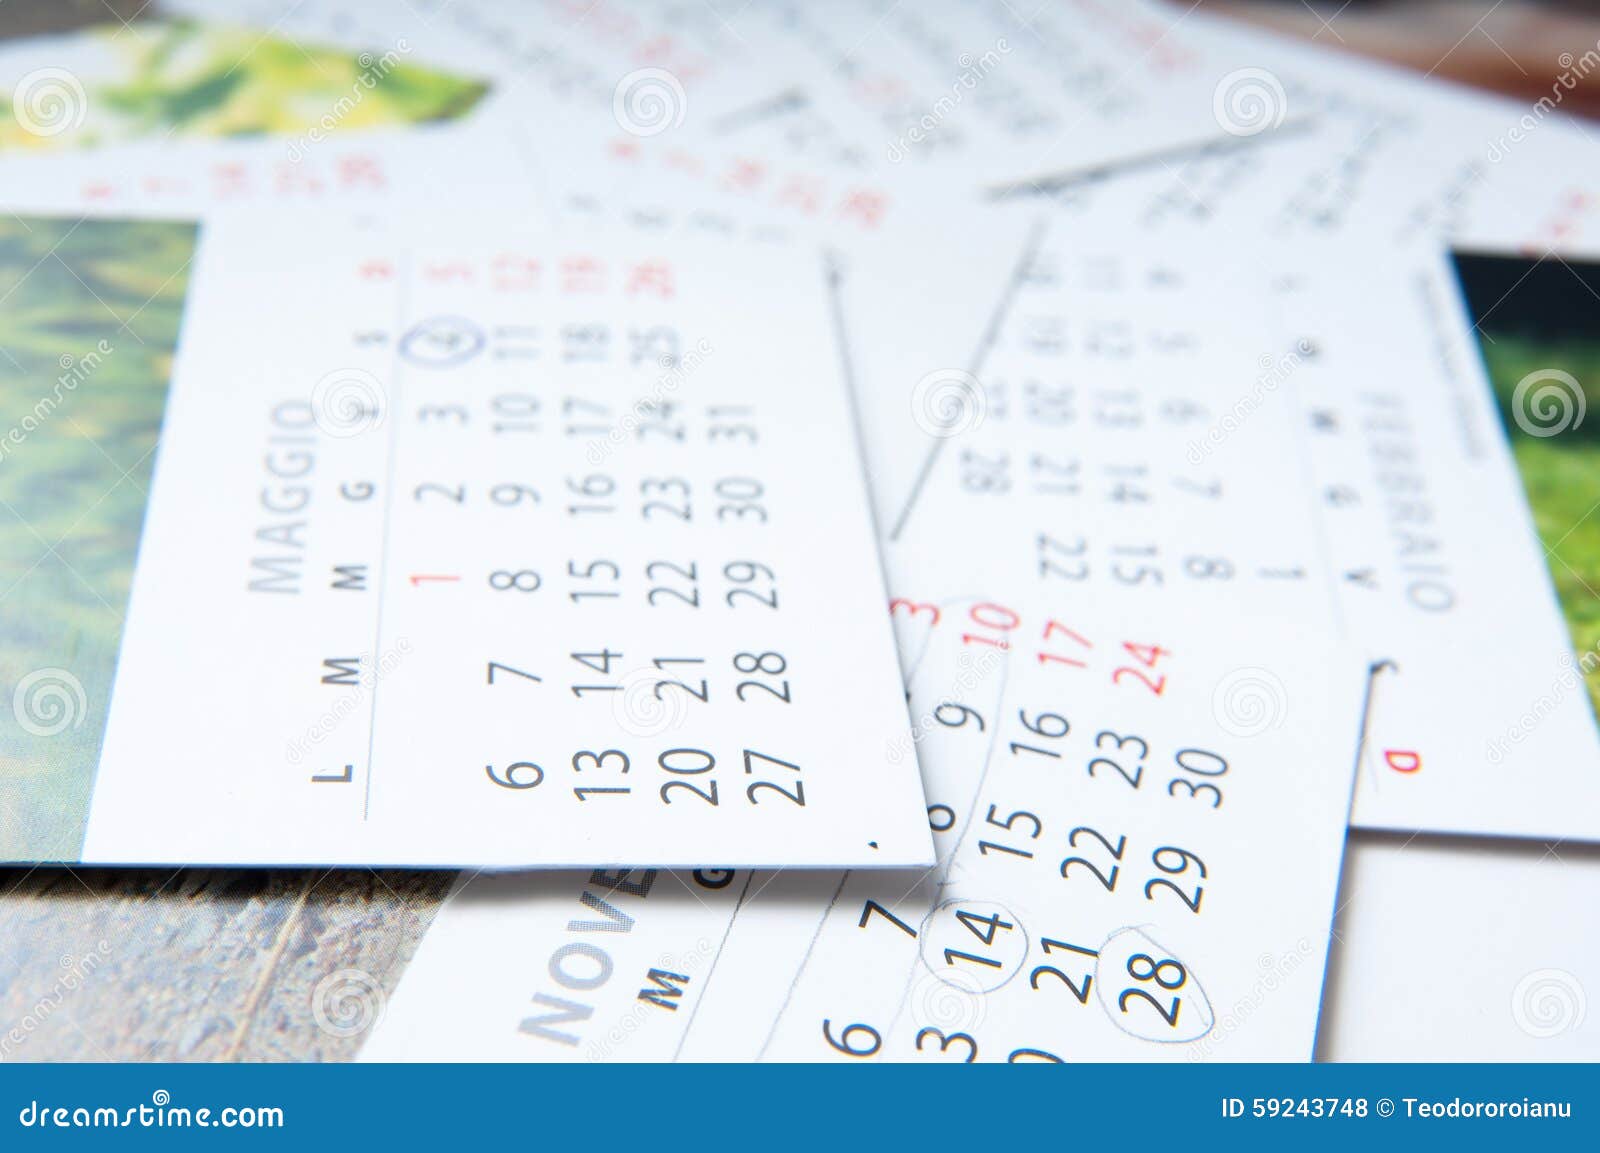 Monthly calendars stock photo. Image of printed, days - 59243748